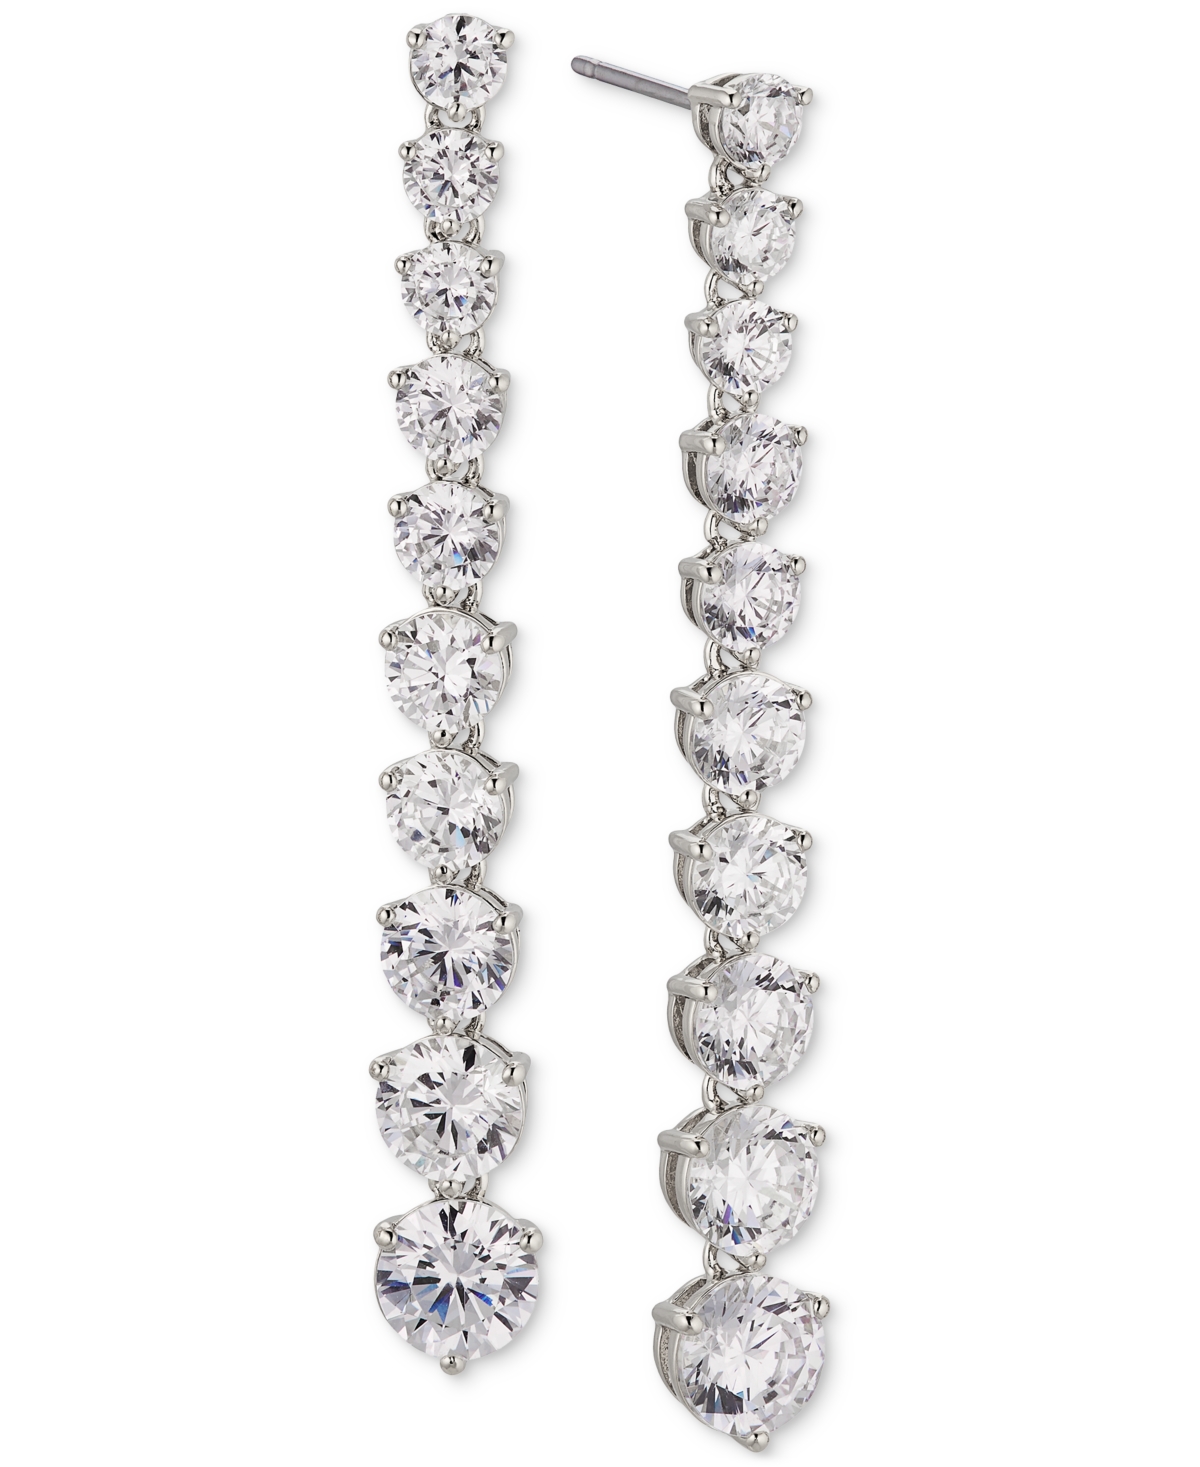 Silver-Tone Cubic Zirconia Graduated Linear Drop Earrings, Created for Macy's - Rhodium